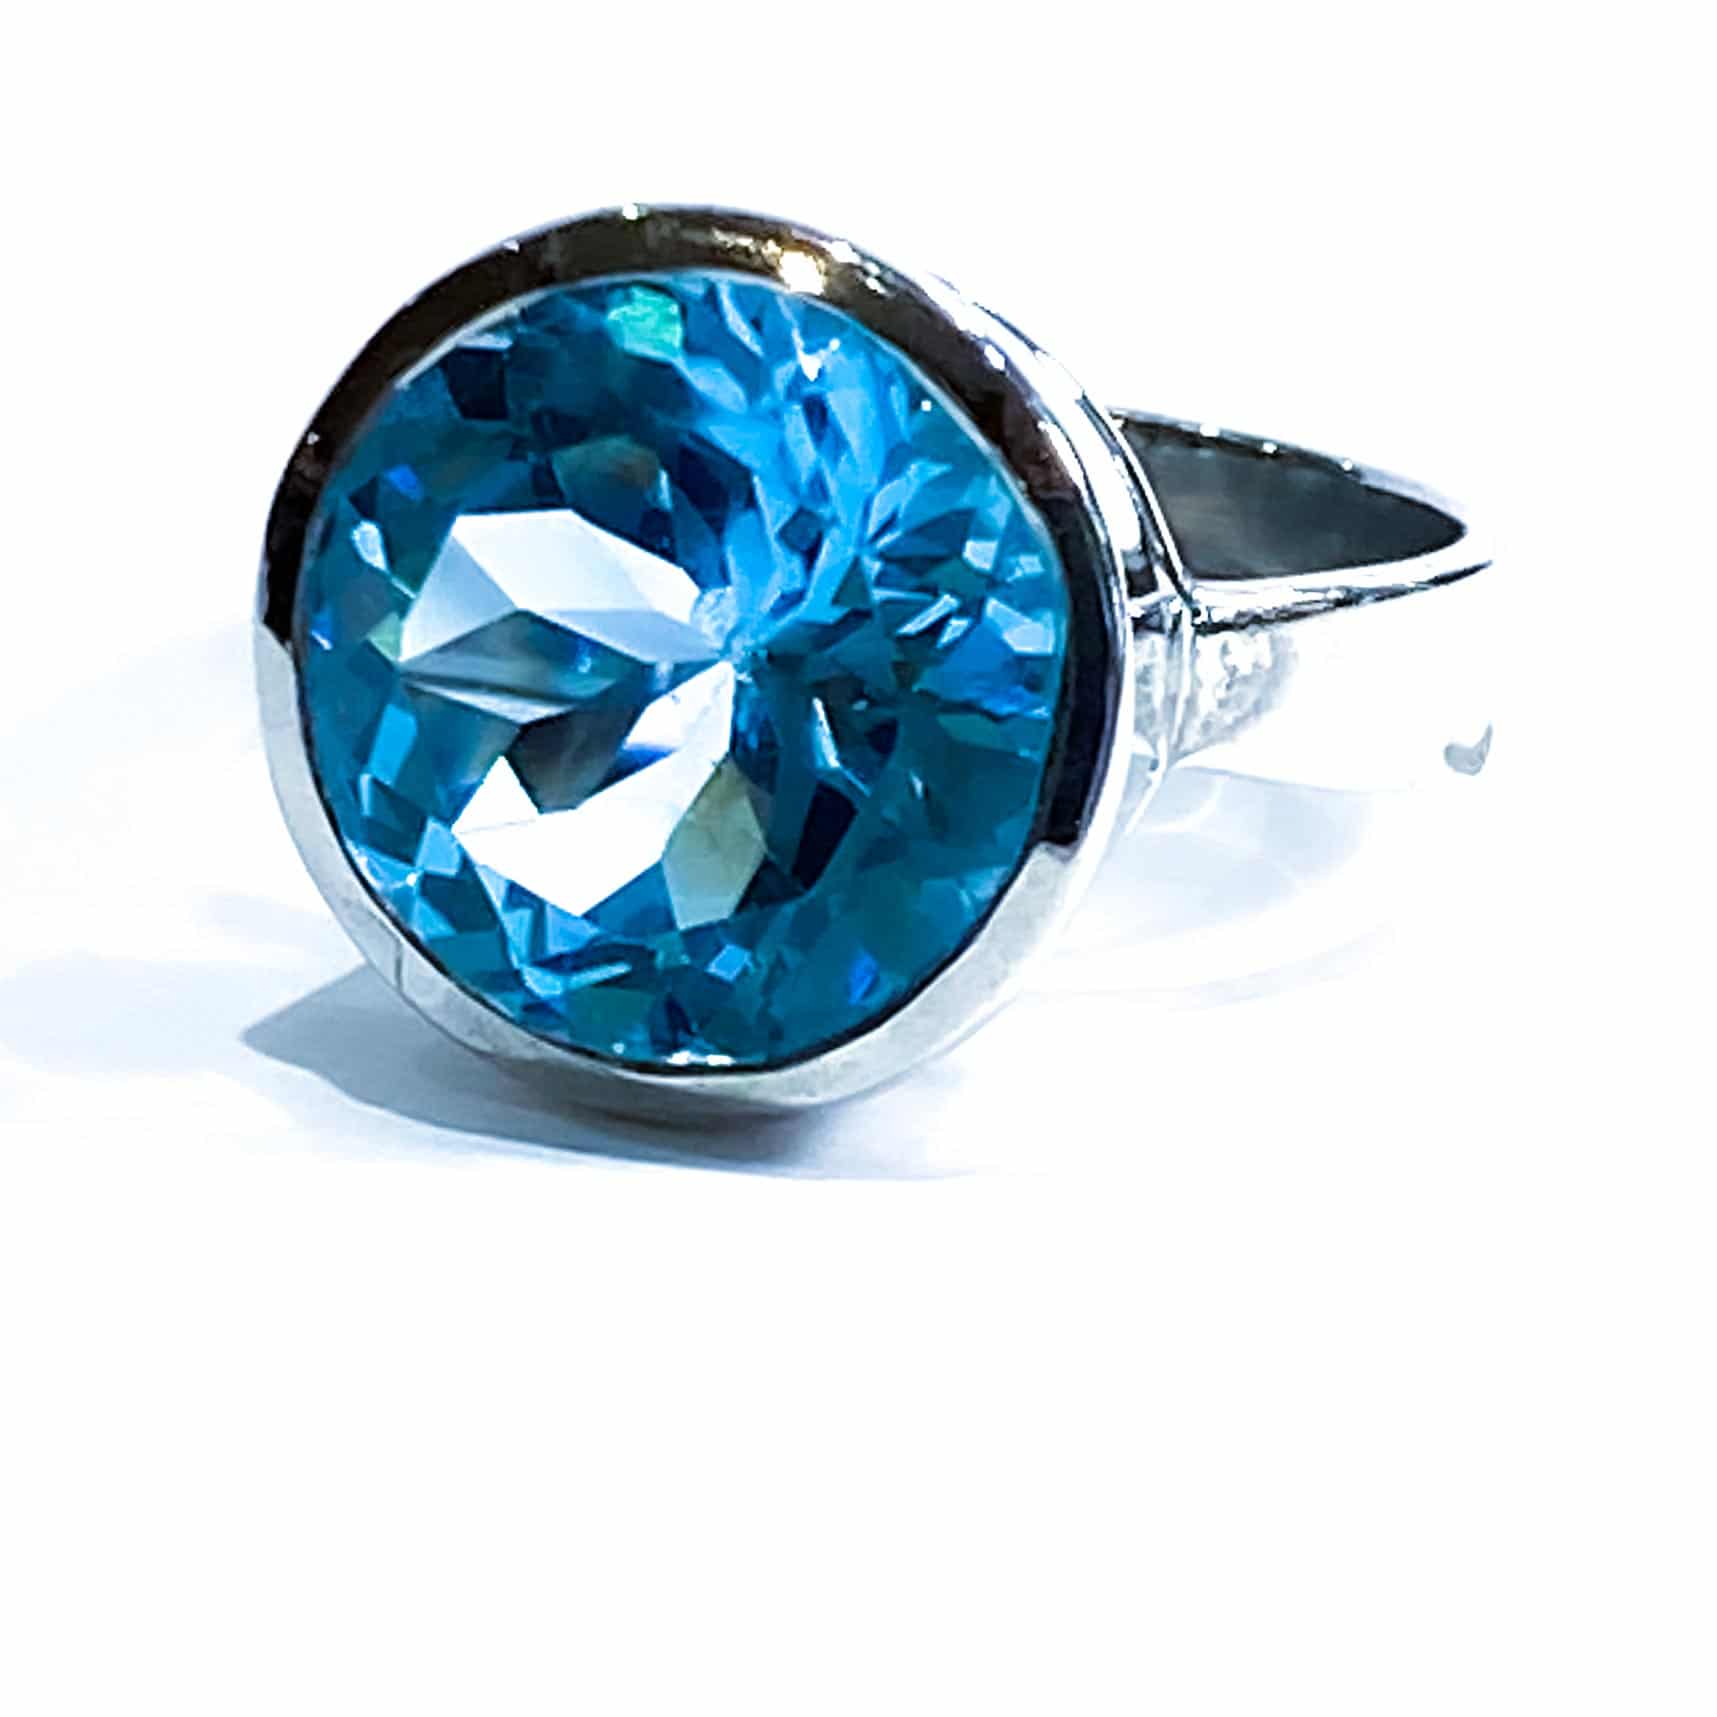 Lady's Blue Topaz Sterling Silver Ring - Robert and Gabriel Jewelers